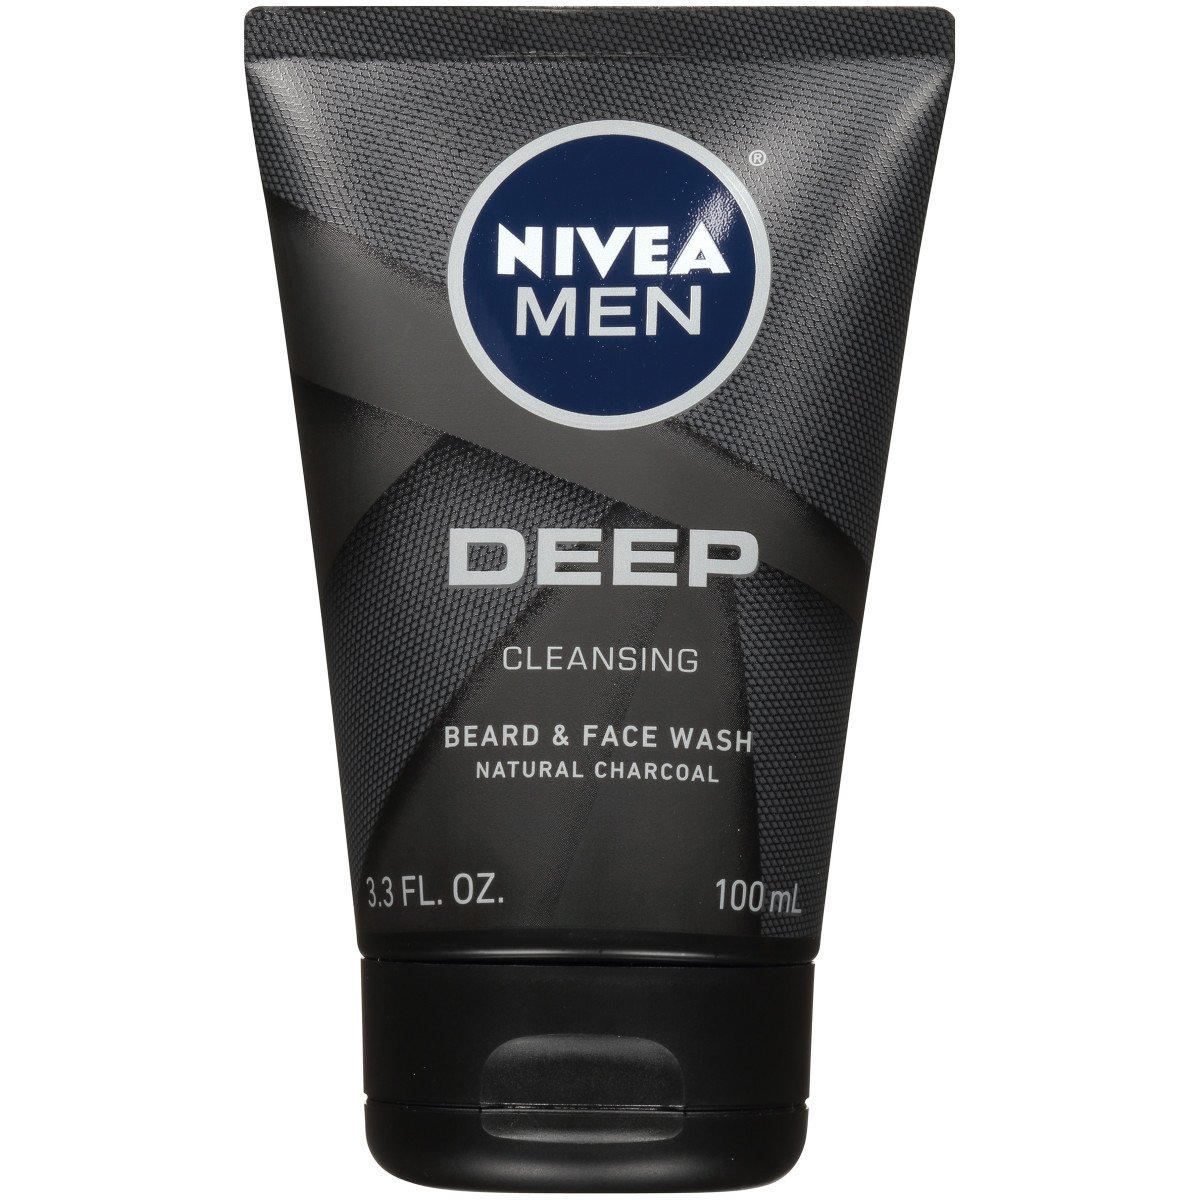 Nivea Men Deep Cleansing Beard And Face Wash Shop Cleansers And Soaps At